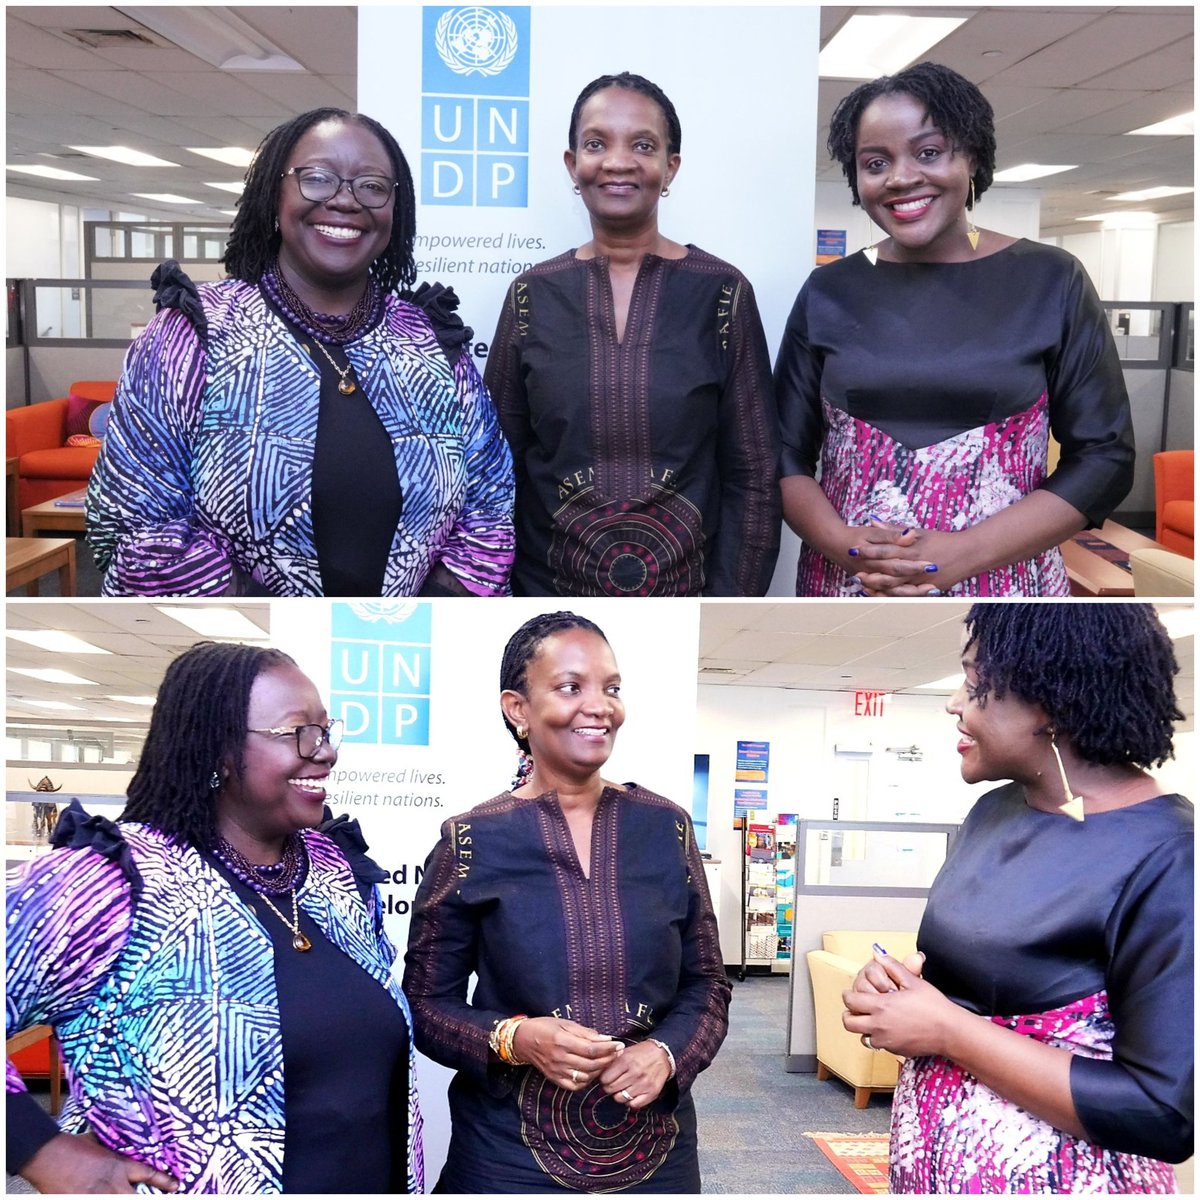 Honoured 2 engage w/ great @UNDPAfrica leaders on the ground today in #NewYork @ElsieAttafuah Res.Rep @UNDPUganda & @DeAissata Res.Rep of @UNDP Gambia . Great conversations on #Afcfta &  #women #youth in #trade
#inspiringwomenleaders
#FutureSmartAfrica 
@ahunnaeziakonwa